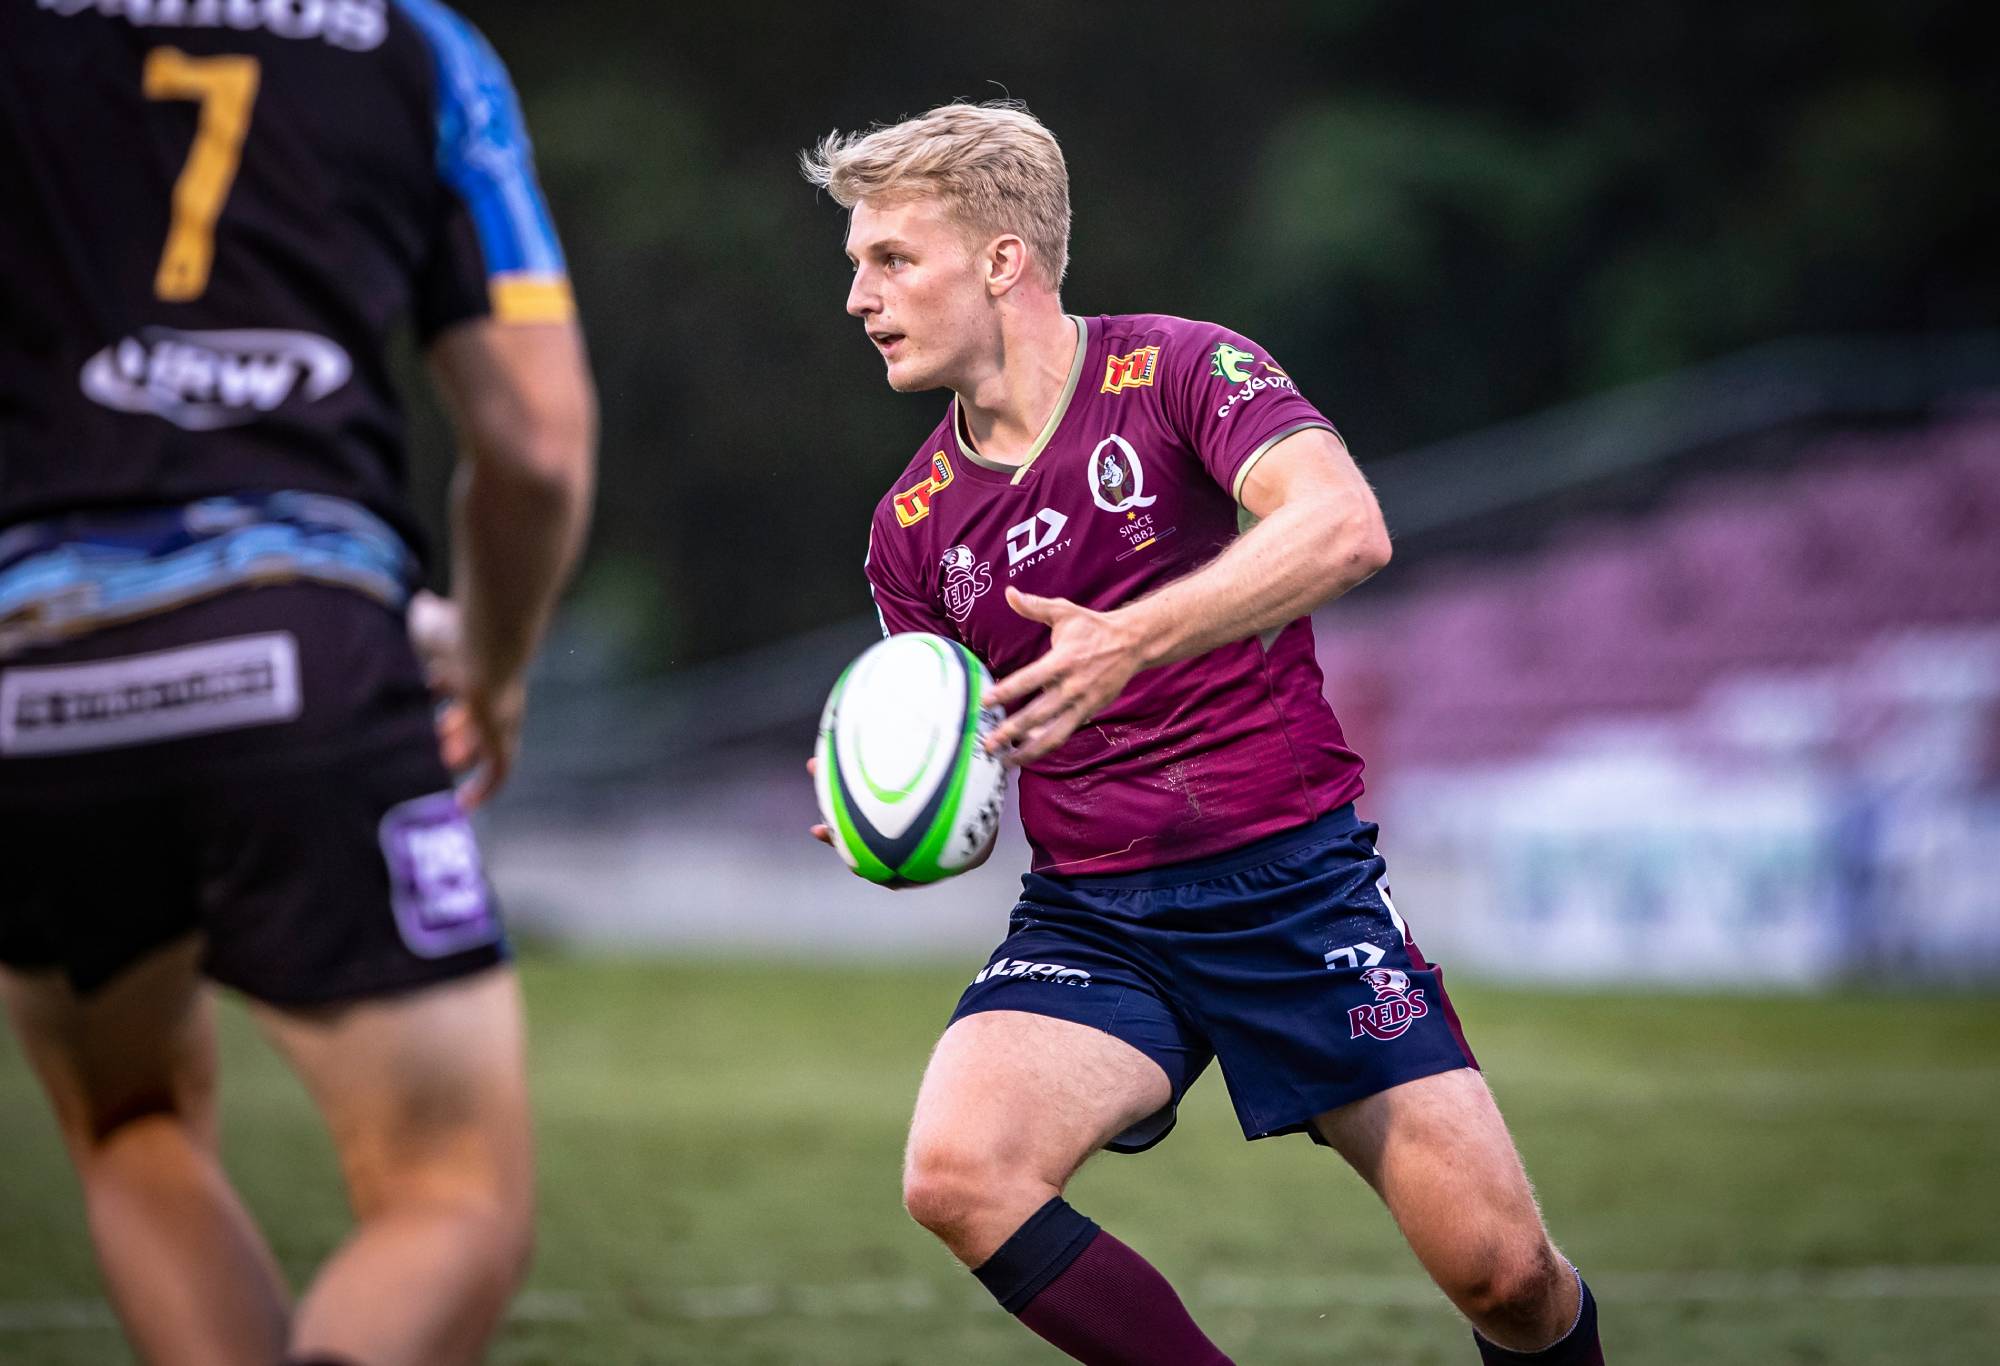 Tom Lynagh made his Reds debut in a trial against Western Force. (Photo by Brendan Hertel/QRU)